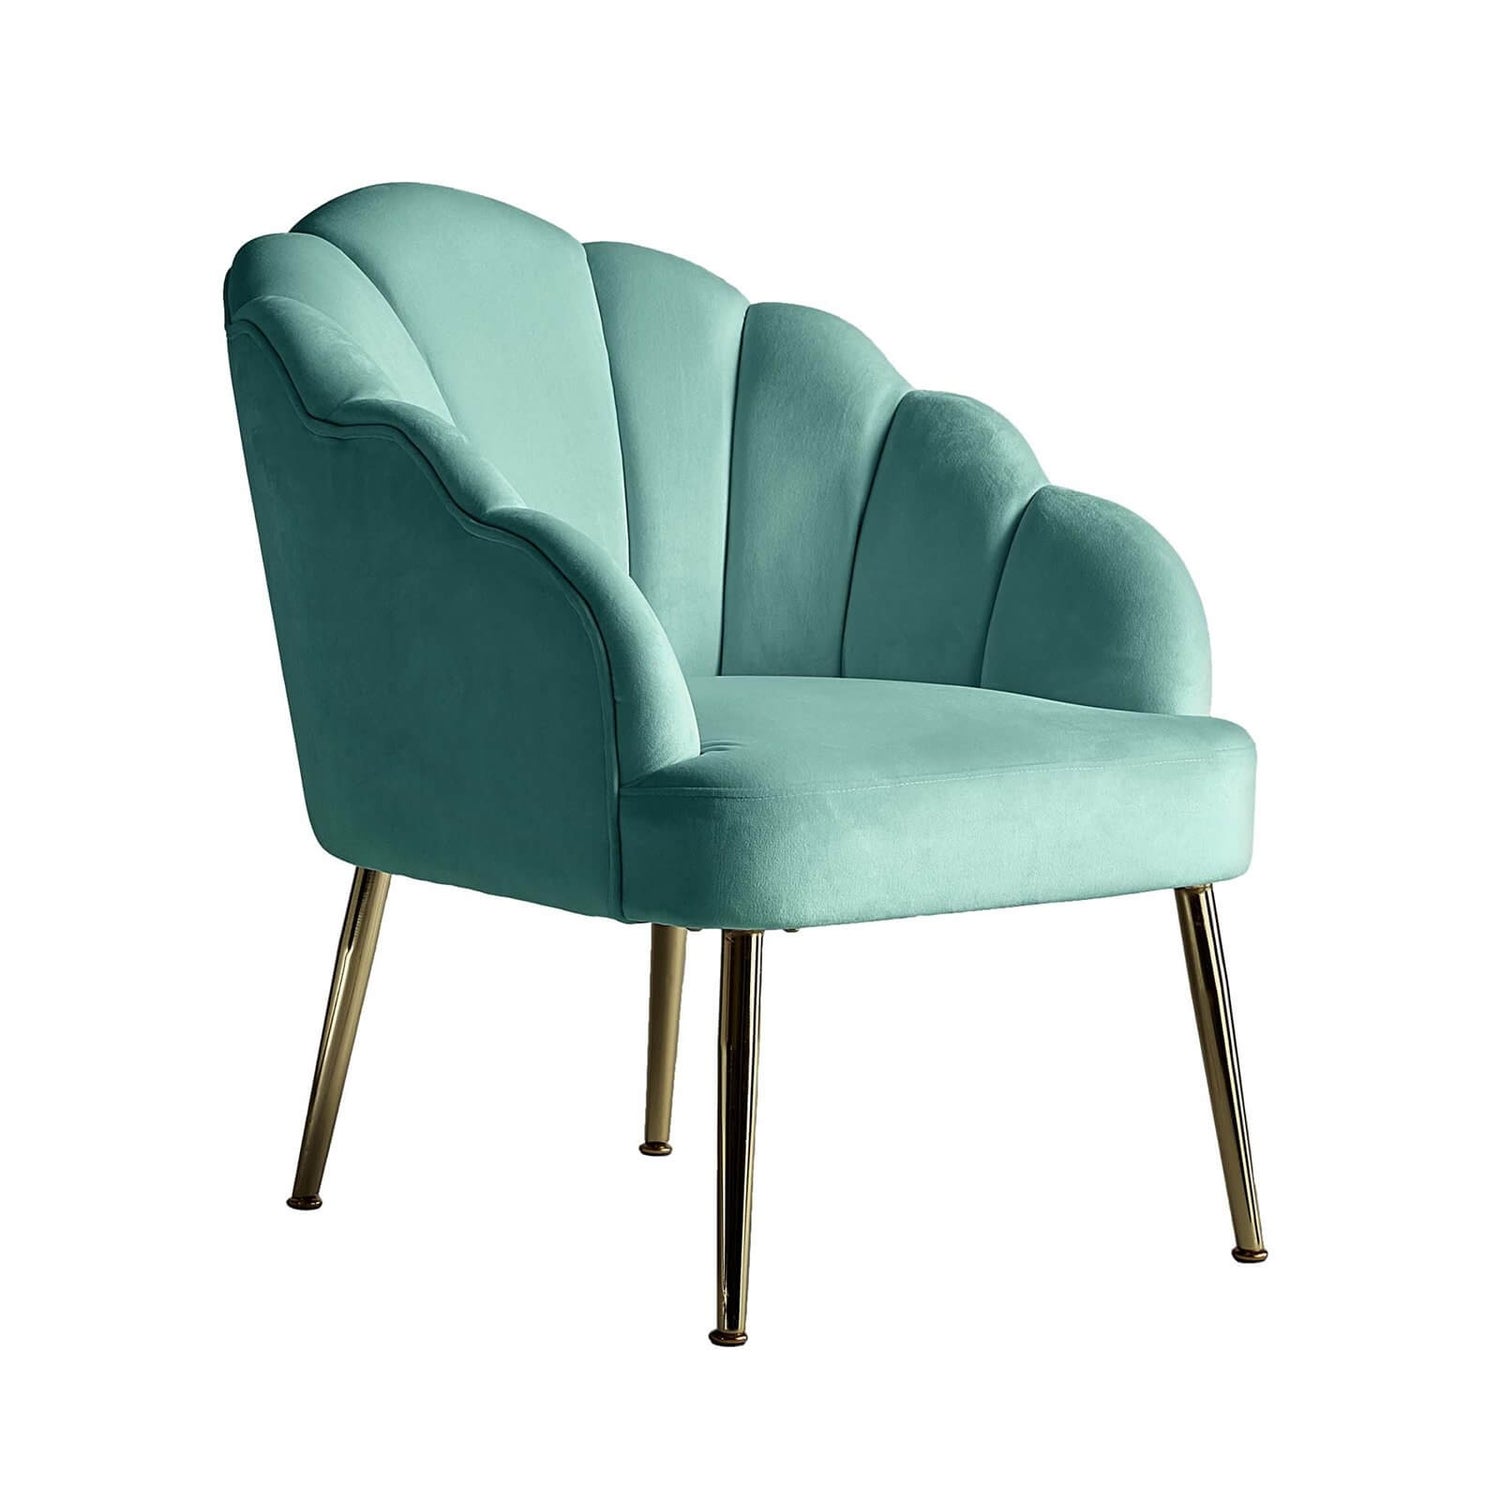 Sophia Scallop Occasional Chair Duck, Duck Egg Blue Dining Chairs